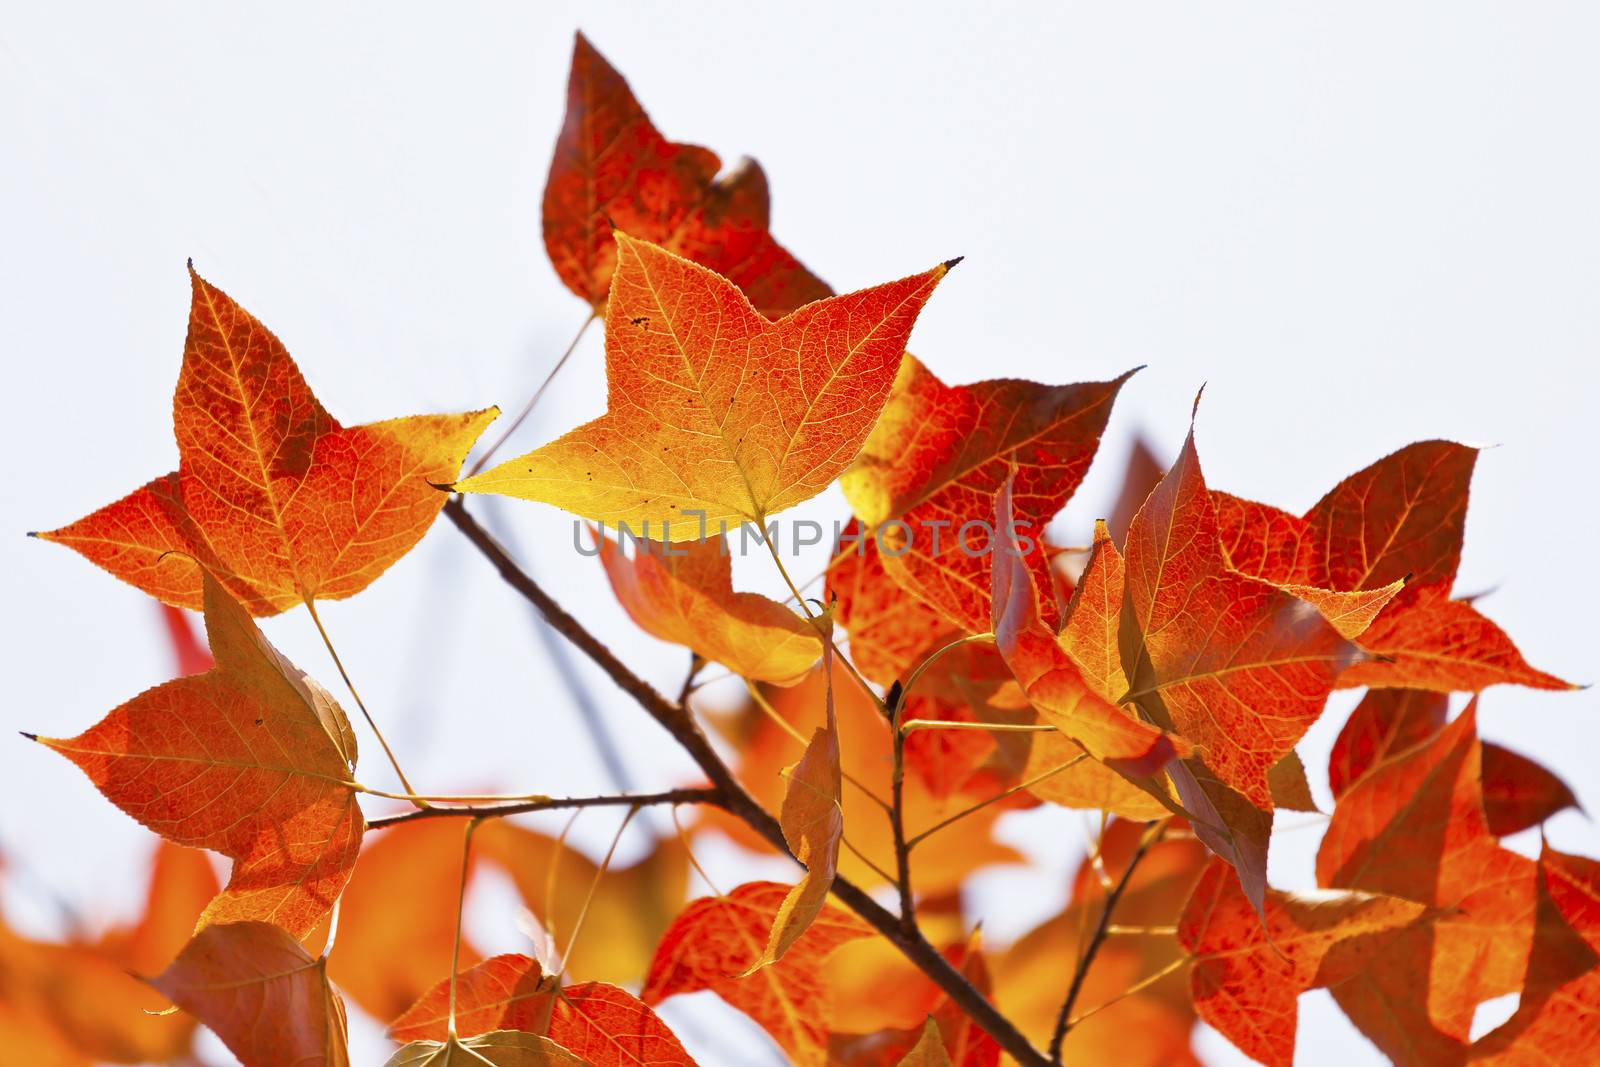 Red leaves in autumn season by kawing921